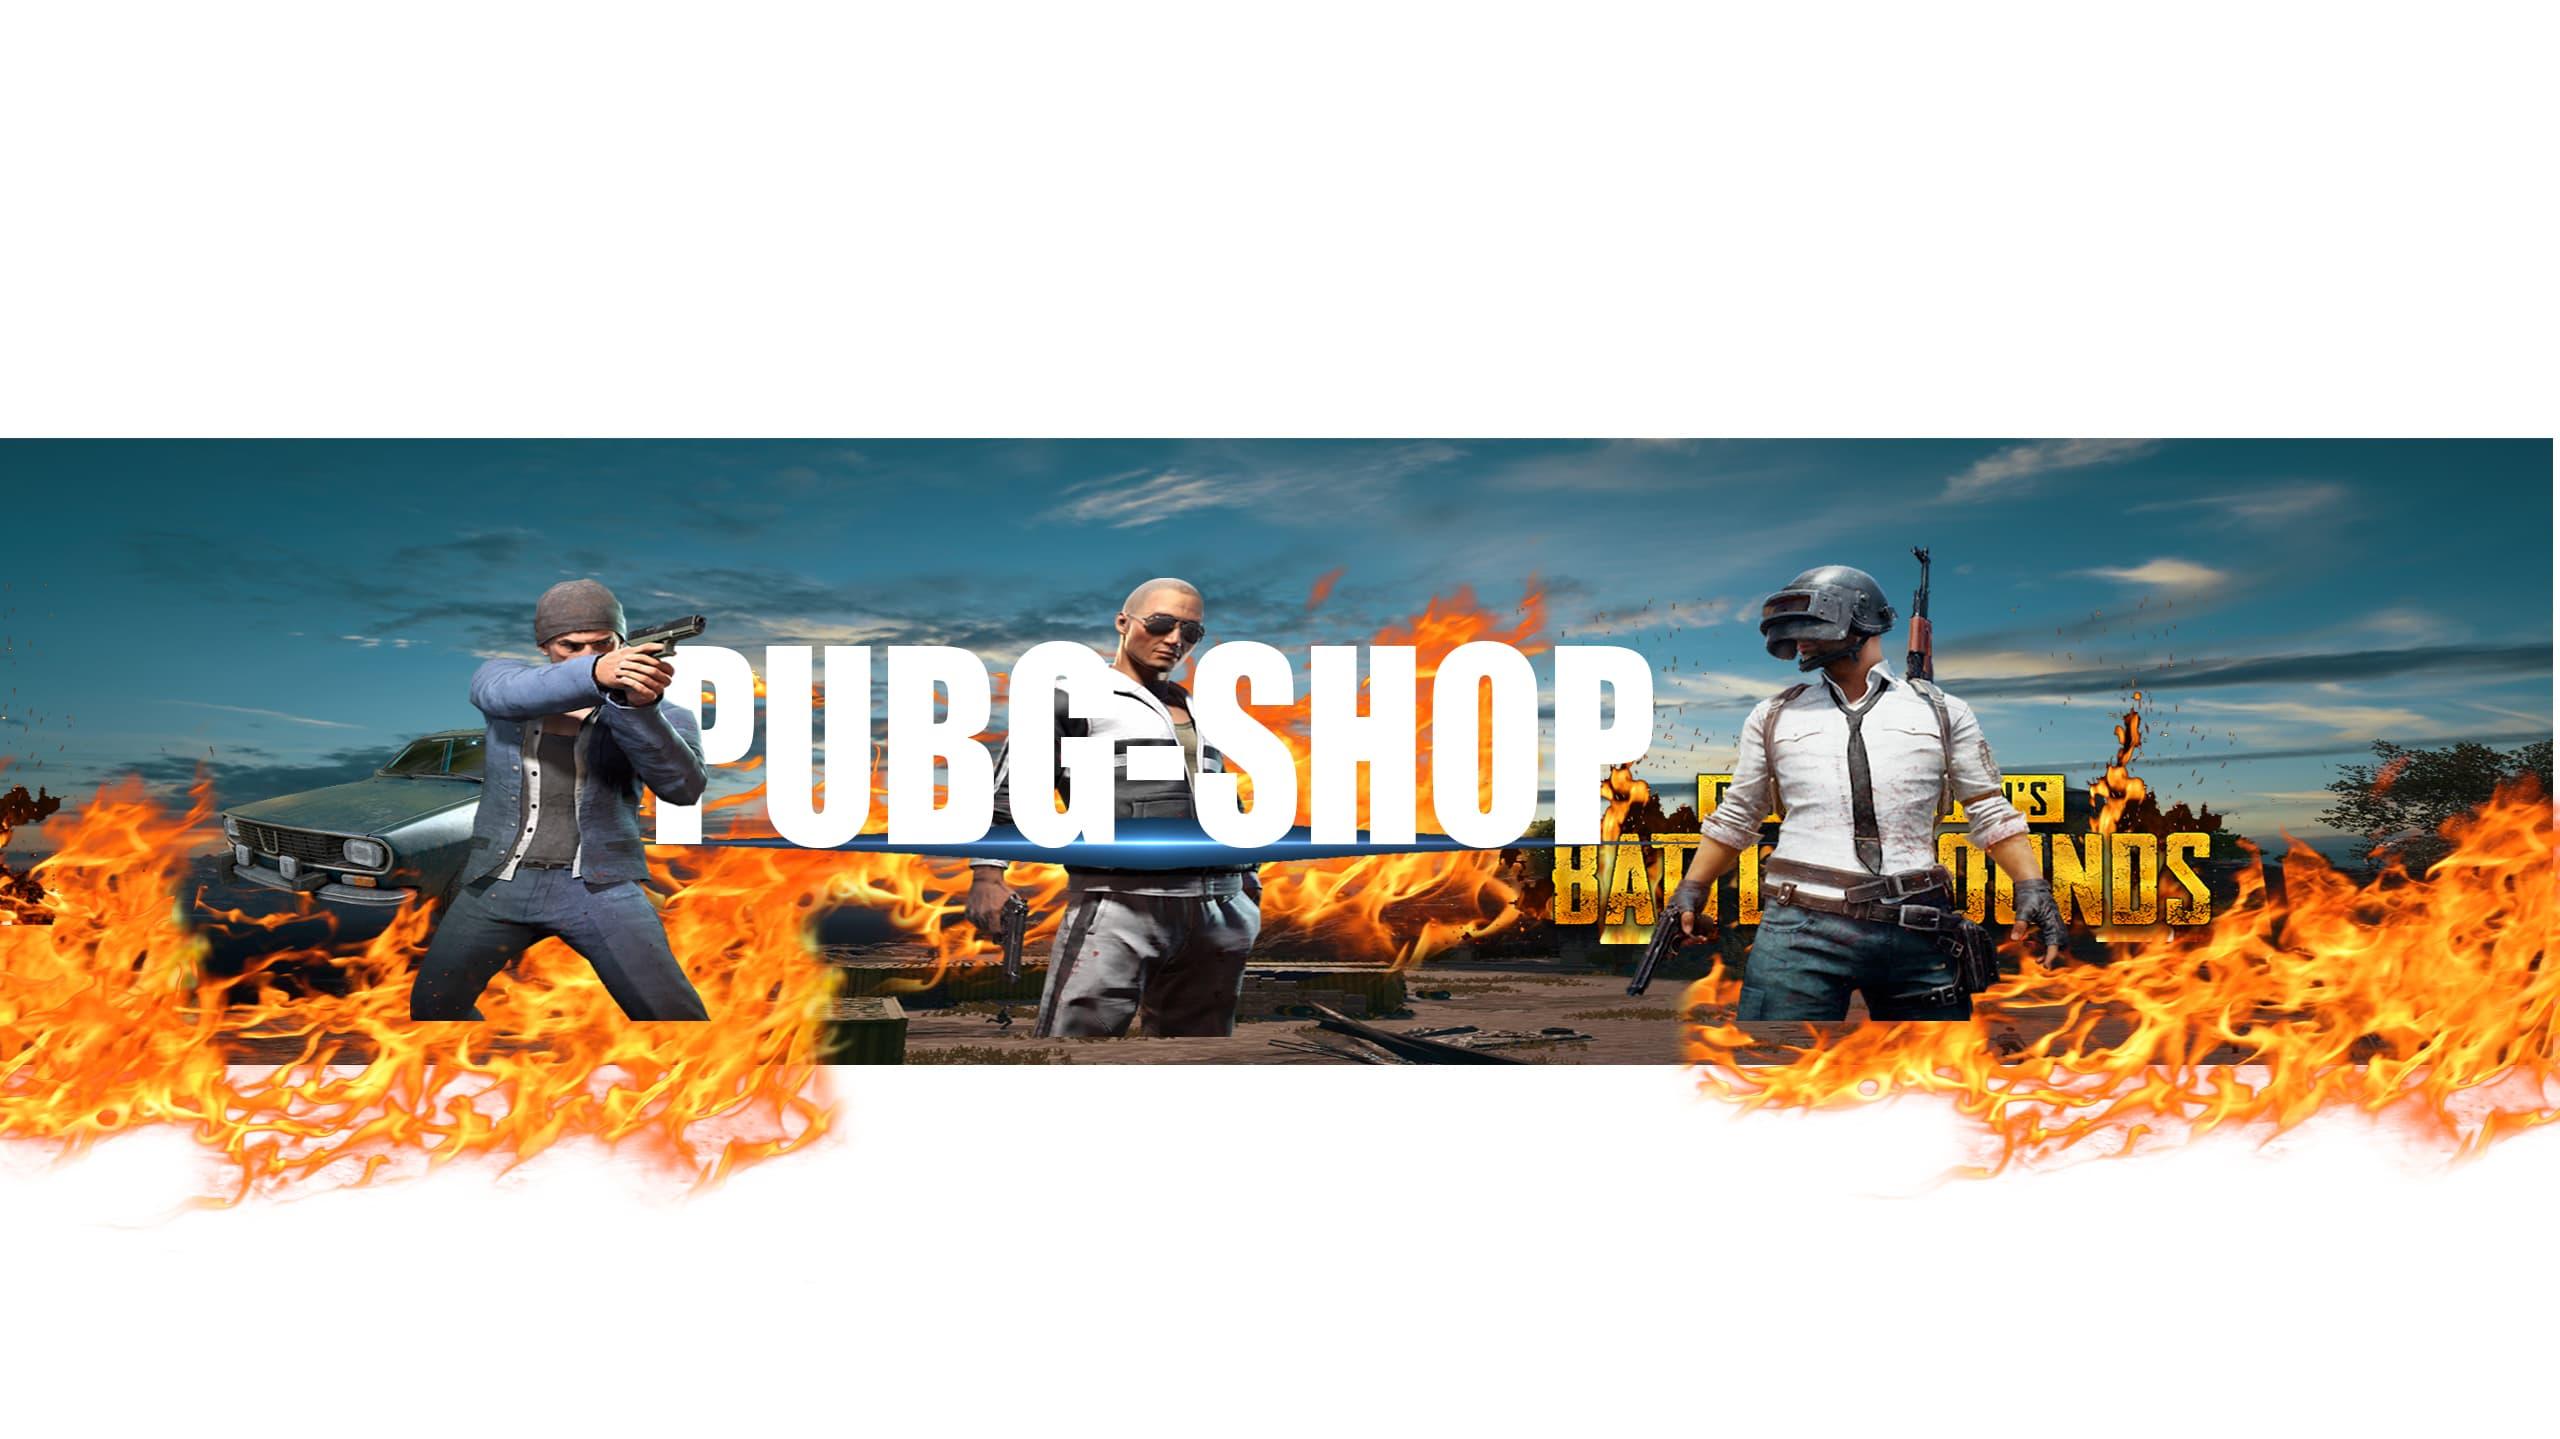 Design epic pubg youtube banner by Aminulislam766 Fiverr